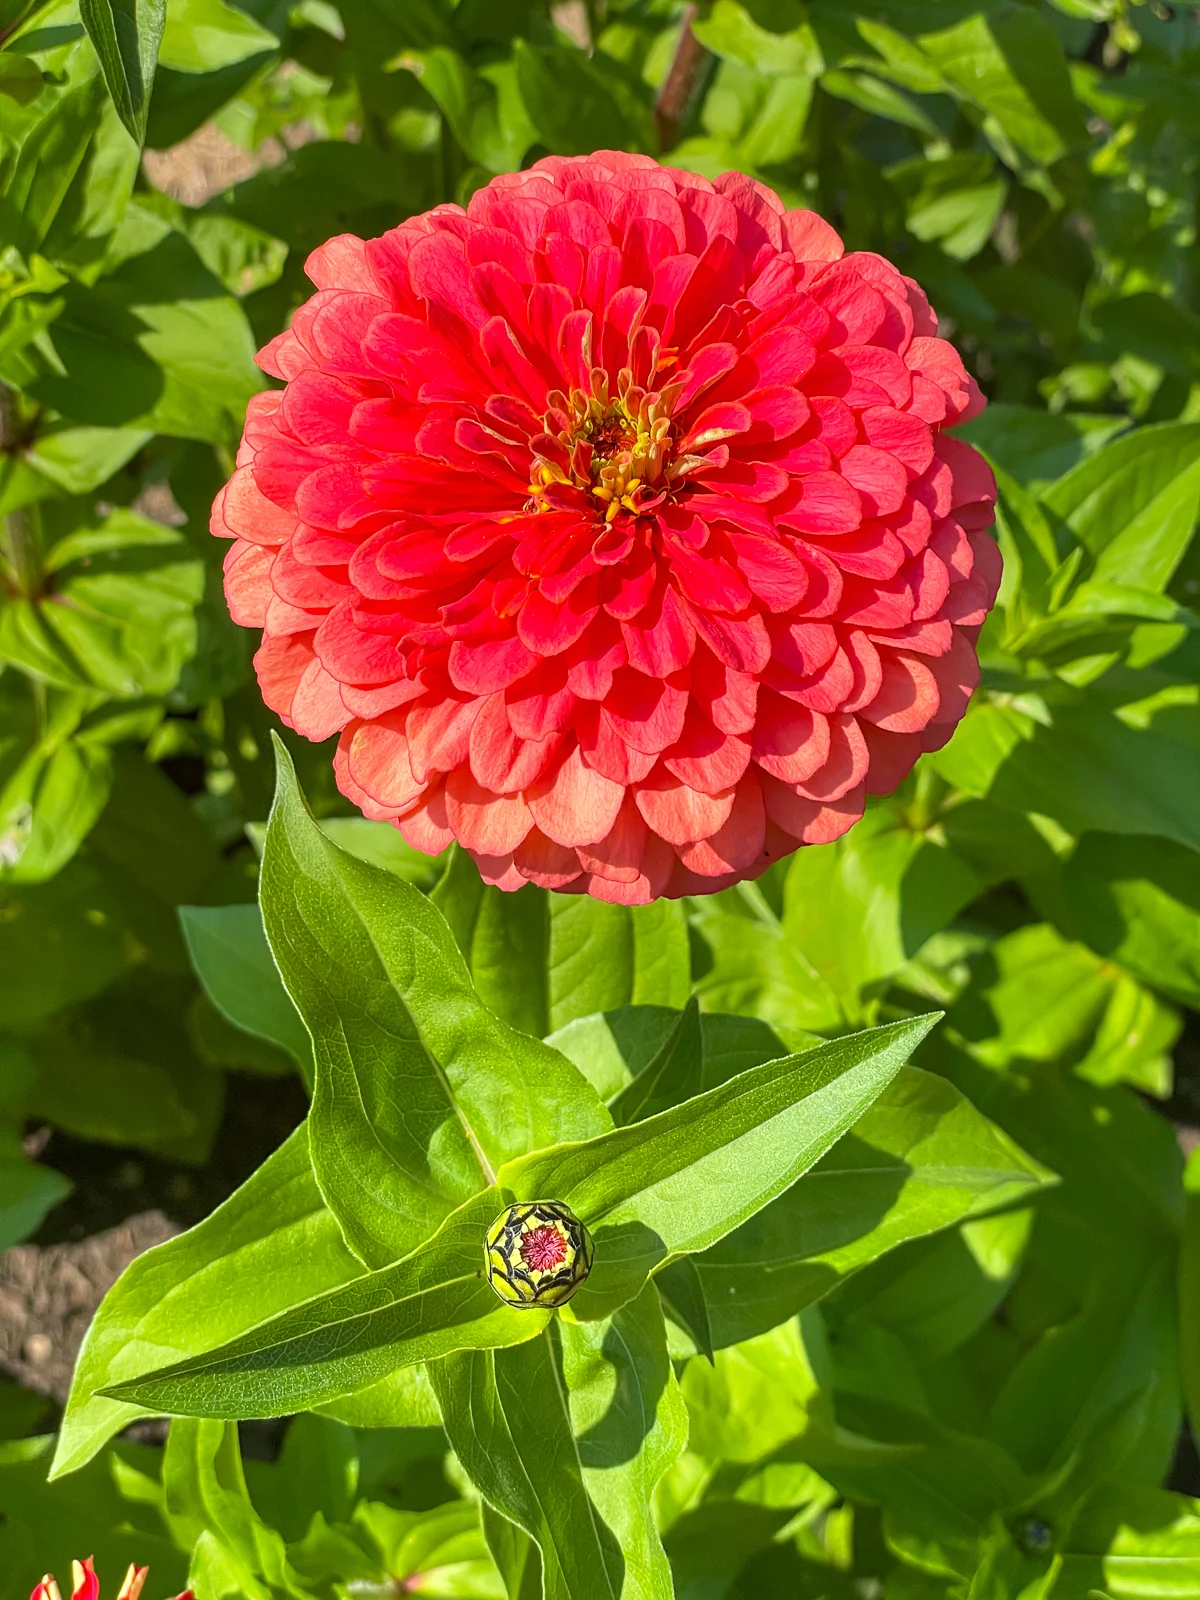 zinnia with flower bud on side shoot